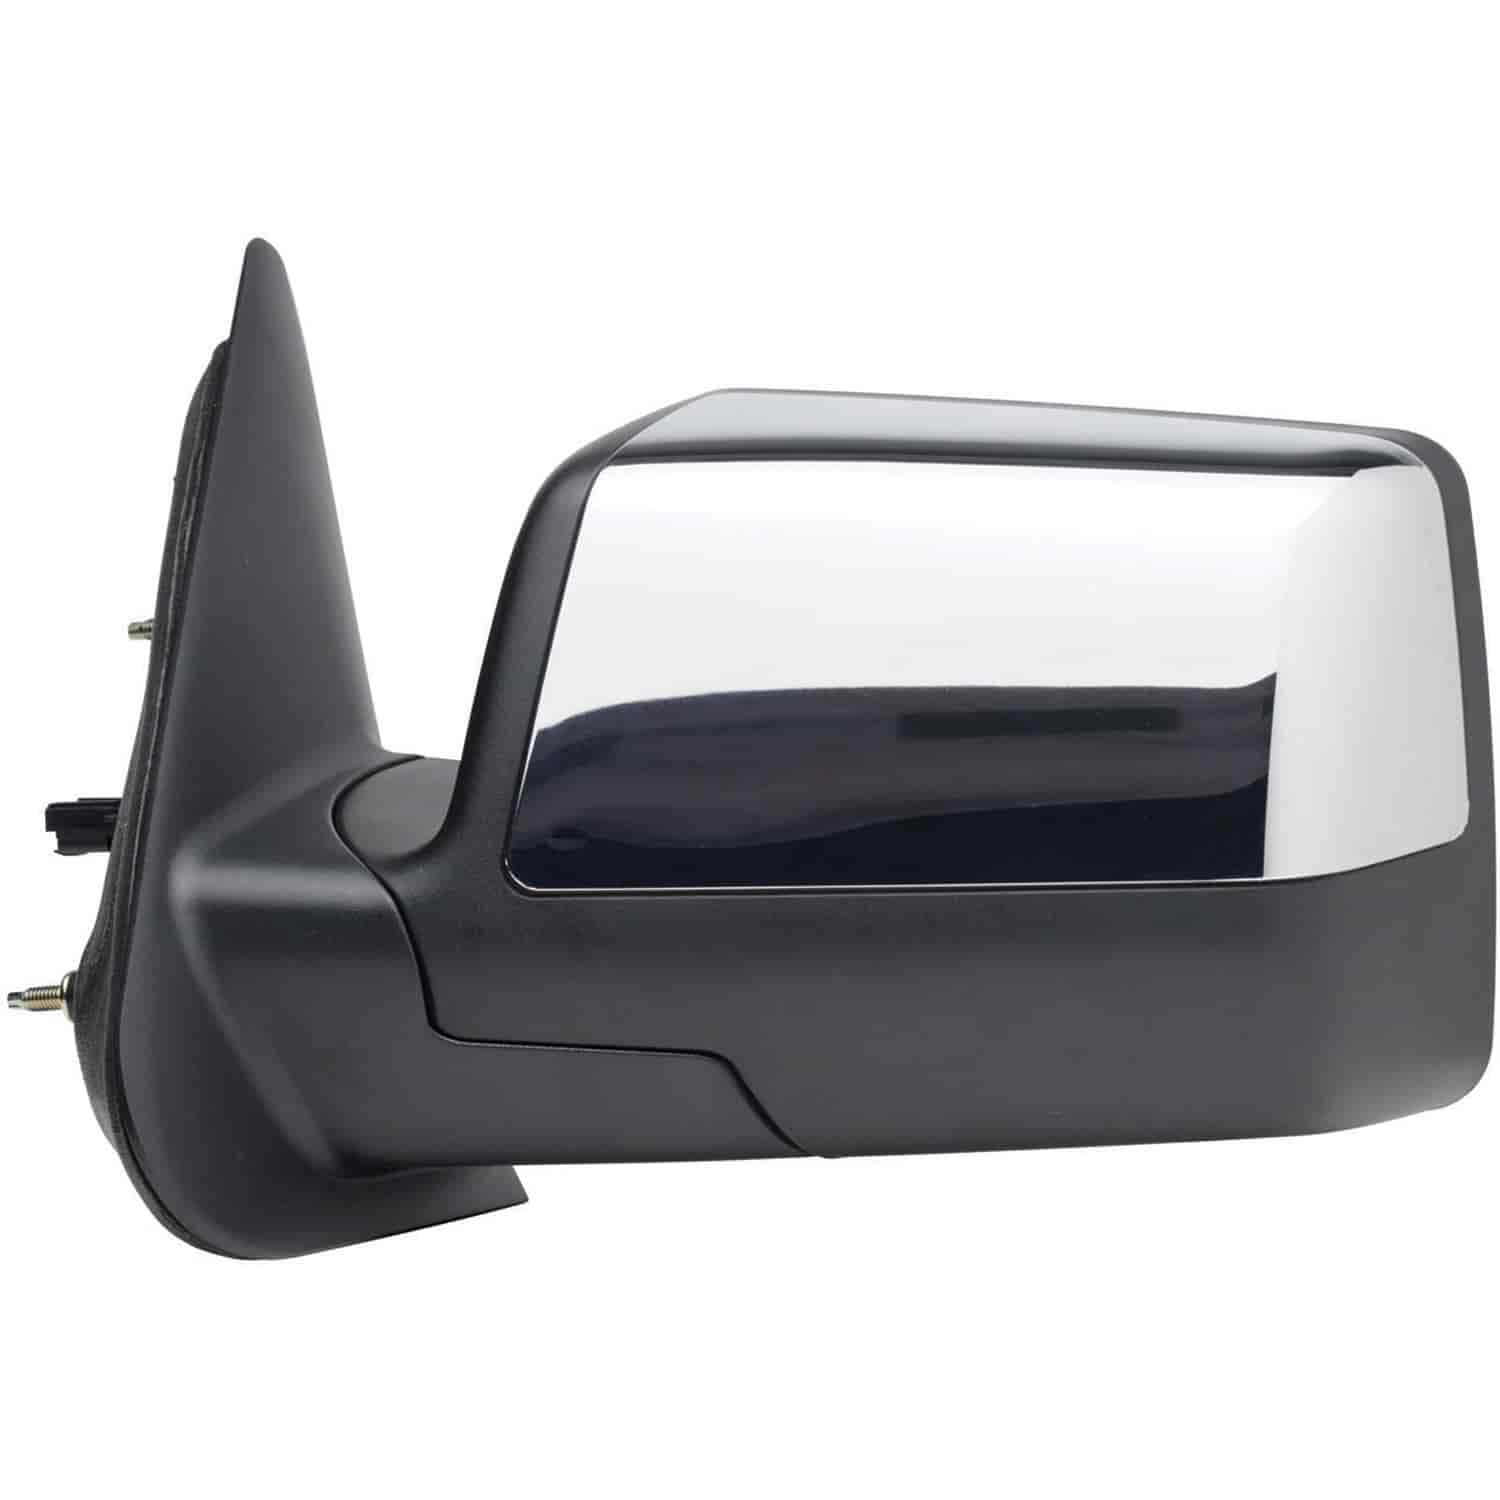 OEM Style Replacement mirror for 06-11 Ford Rangerw/chrome cover driver side mirror tested to fit an